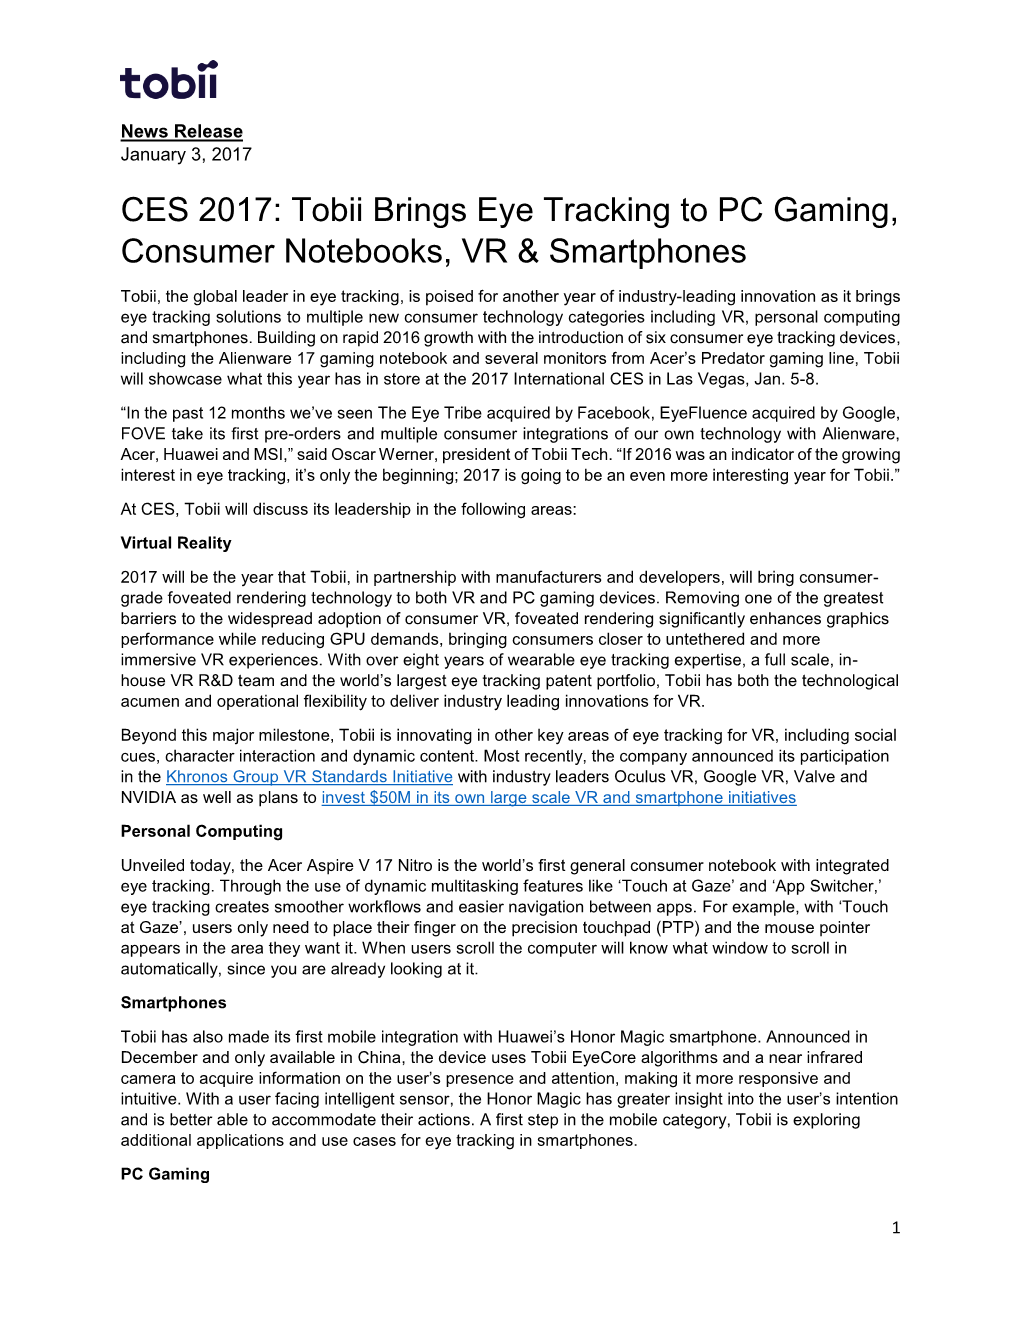 Tobii Brings Eye Tracking to PC Gaming, Consumer Notebooks, VR & Smartphones